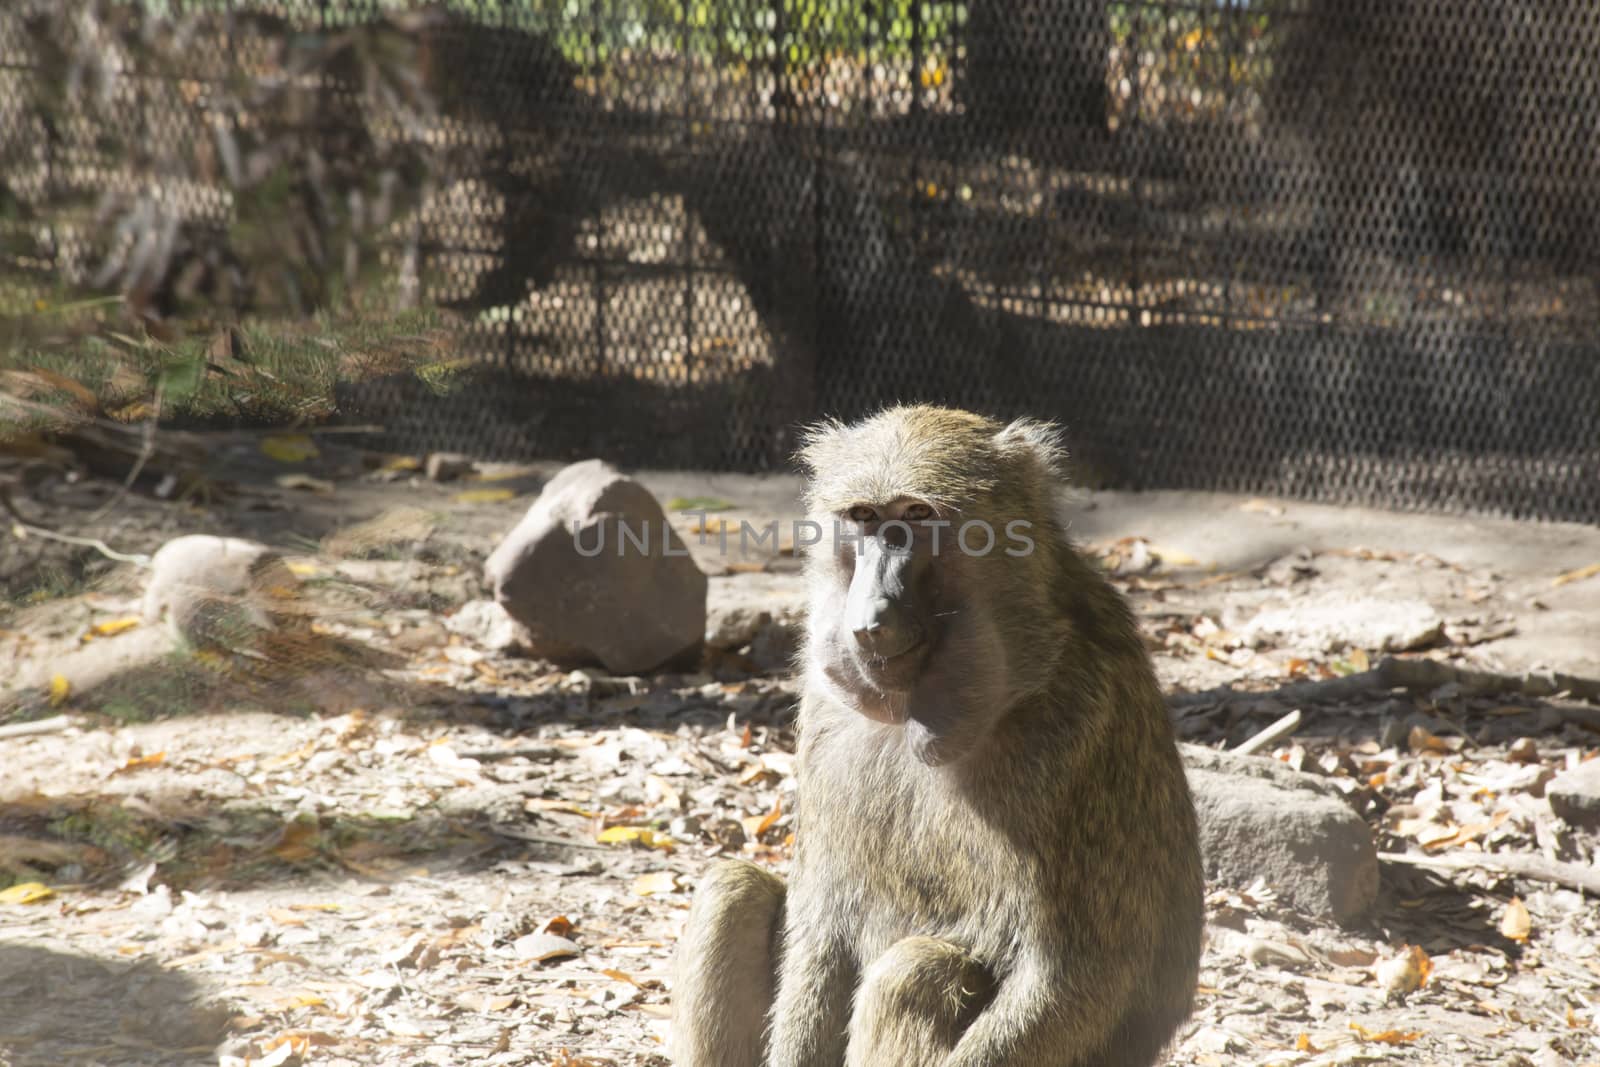 Olive baboon (Papio anubis) with a sly look on its face